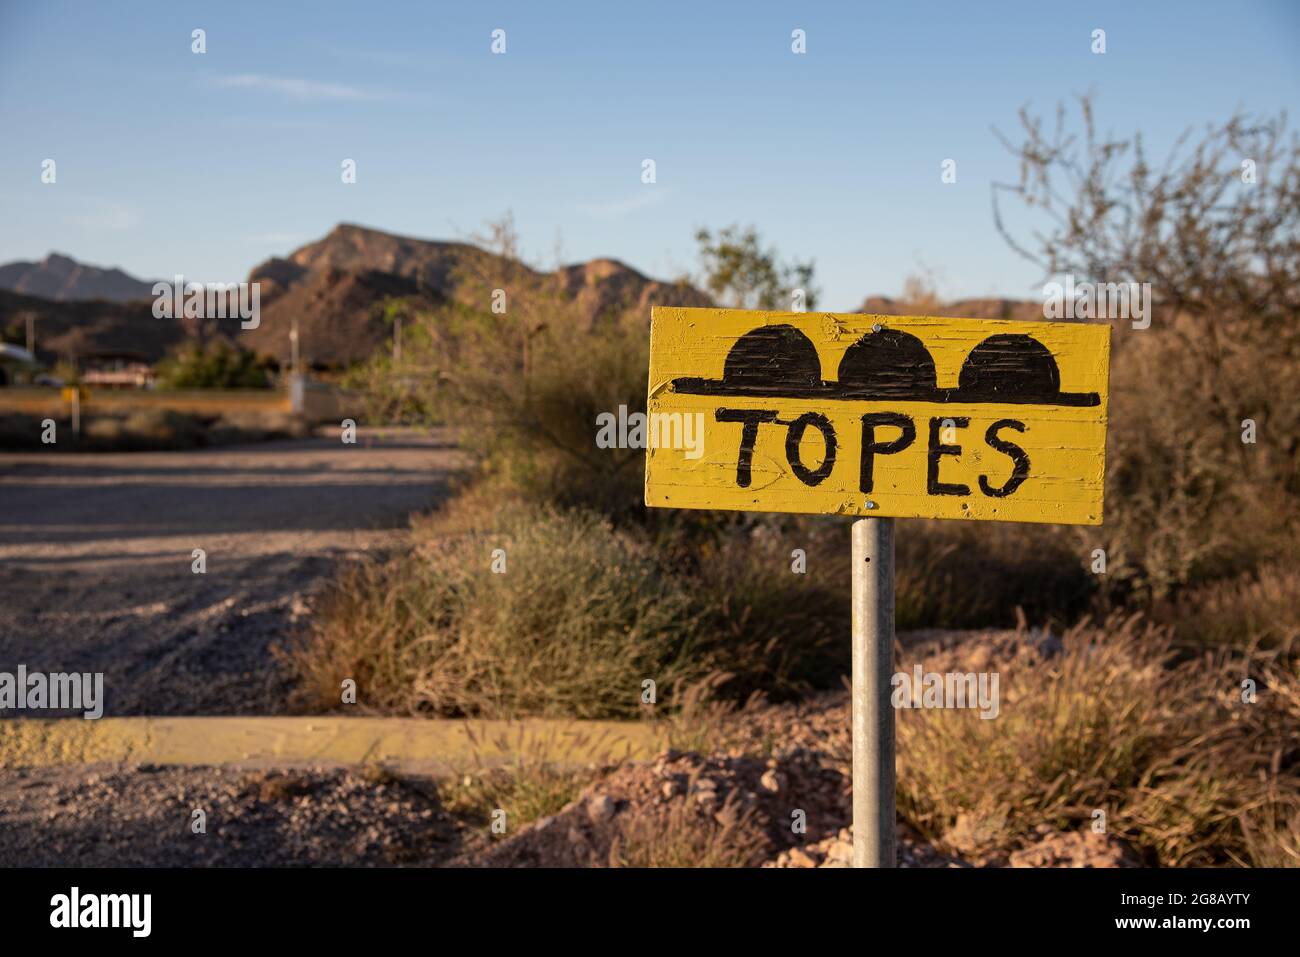 .A yellow sign cautions drivers of upcoming speed bumps, the words written in Spanish “words.” Stock Photo